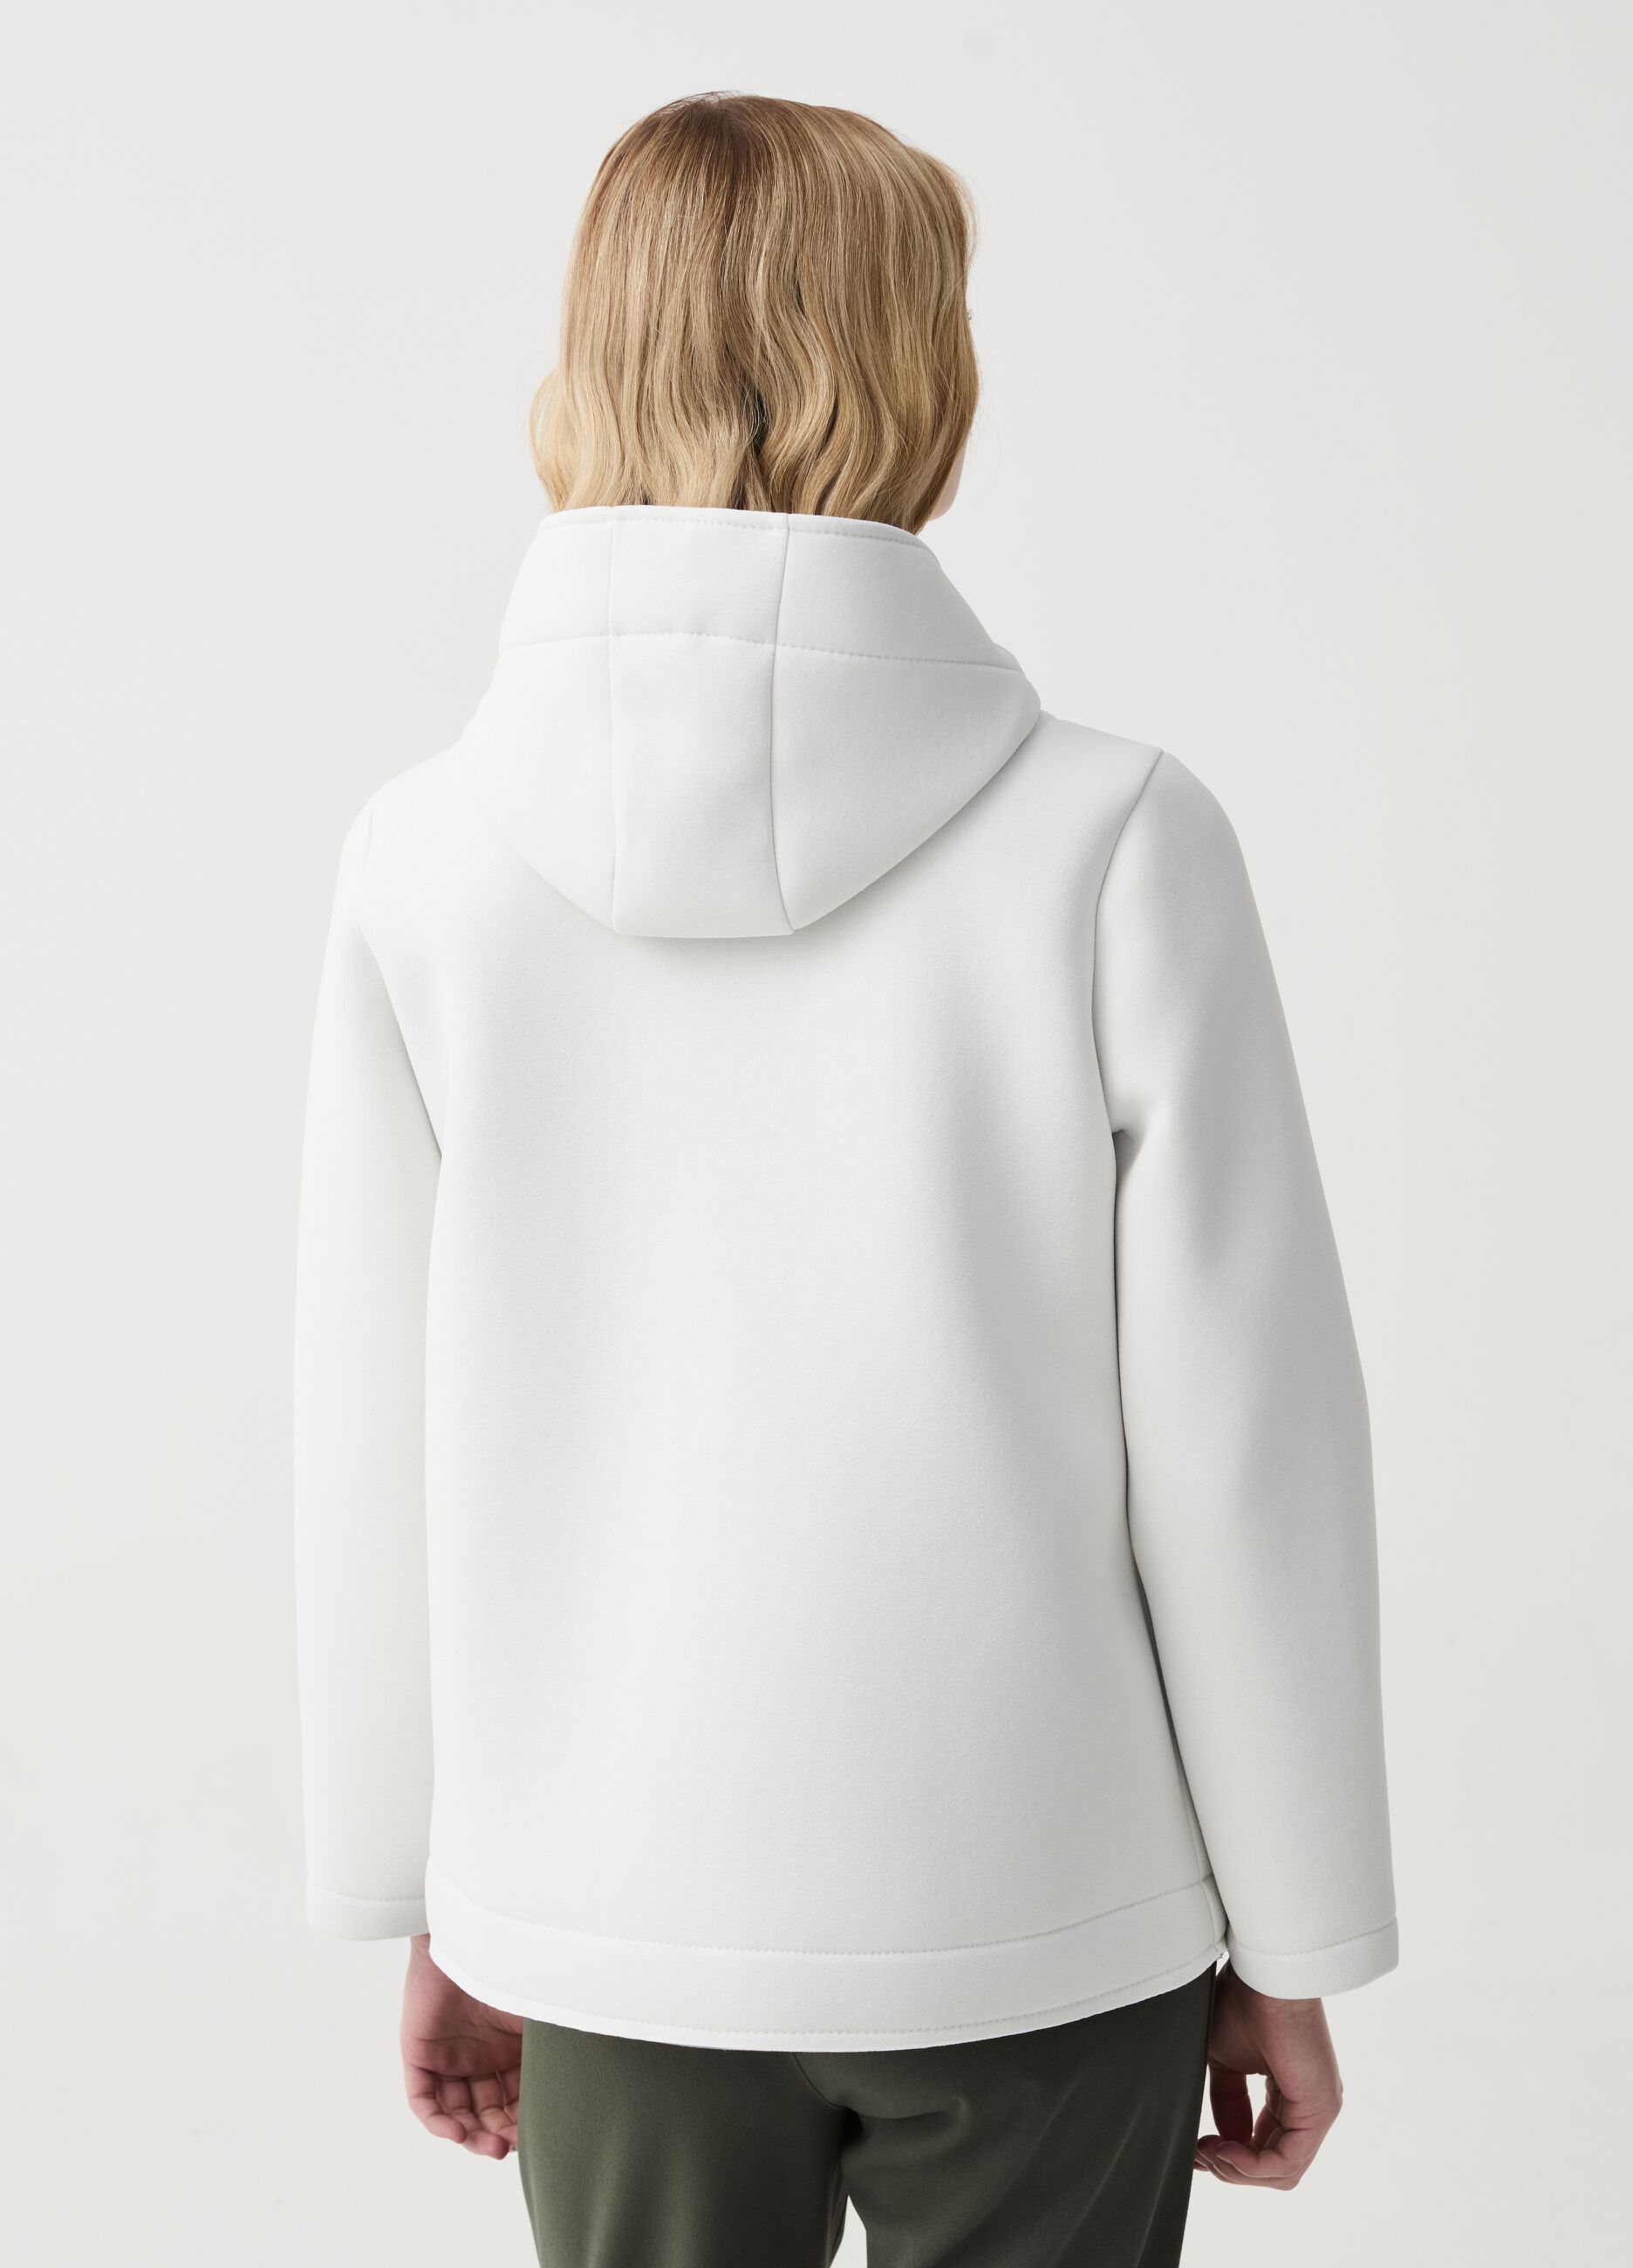 Cropped jacket with hood and zip pockets